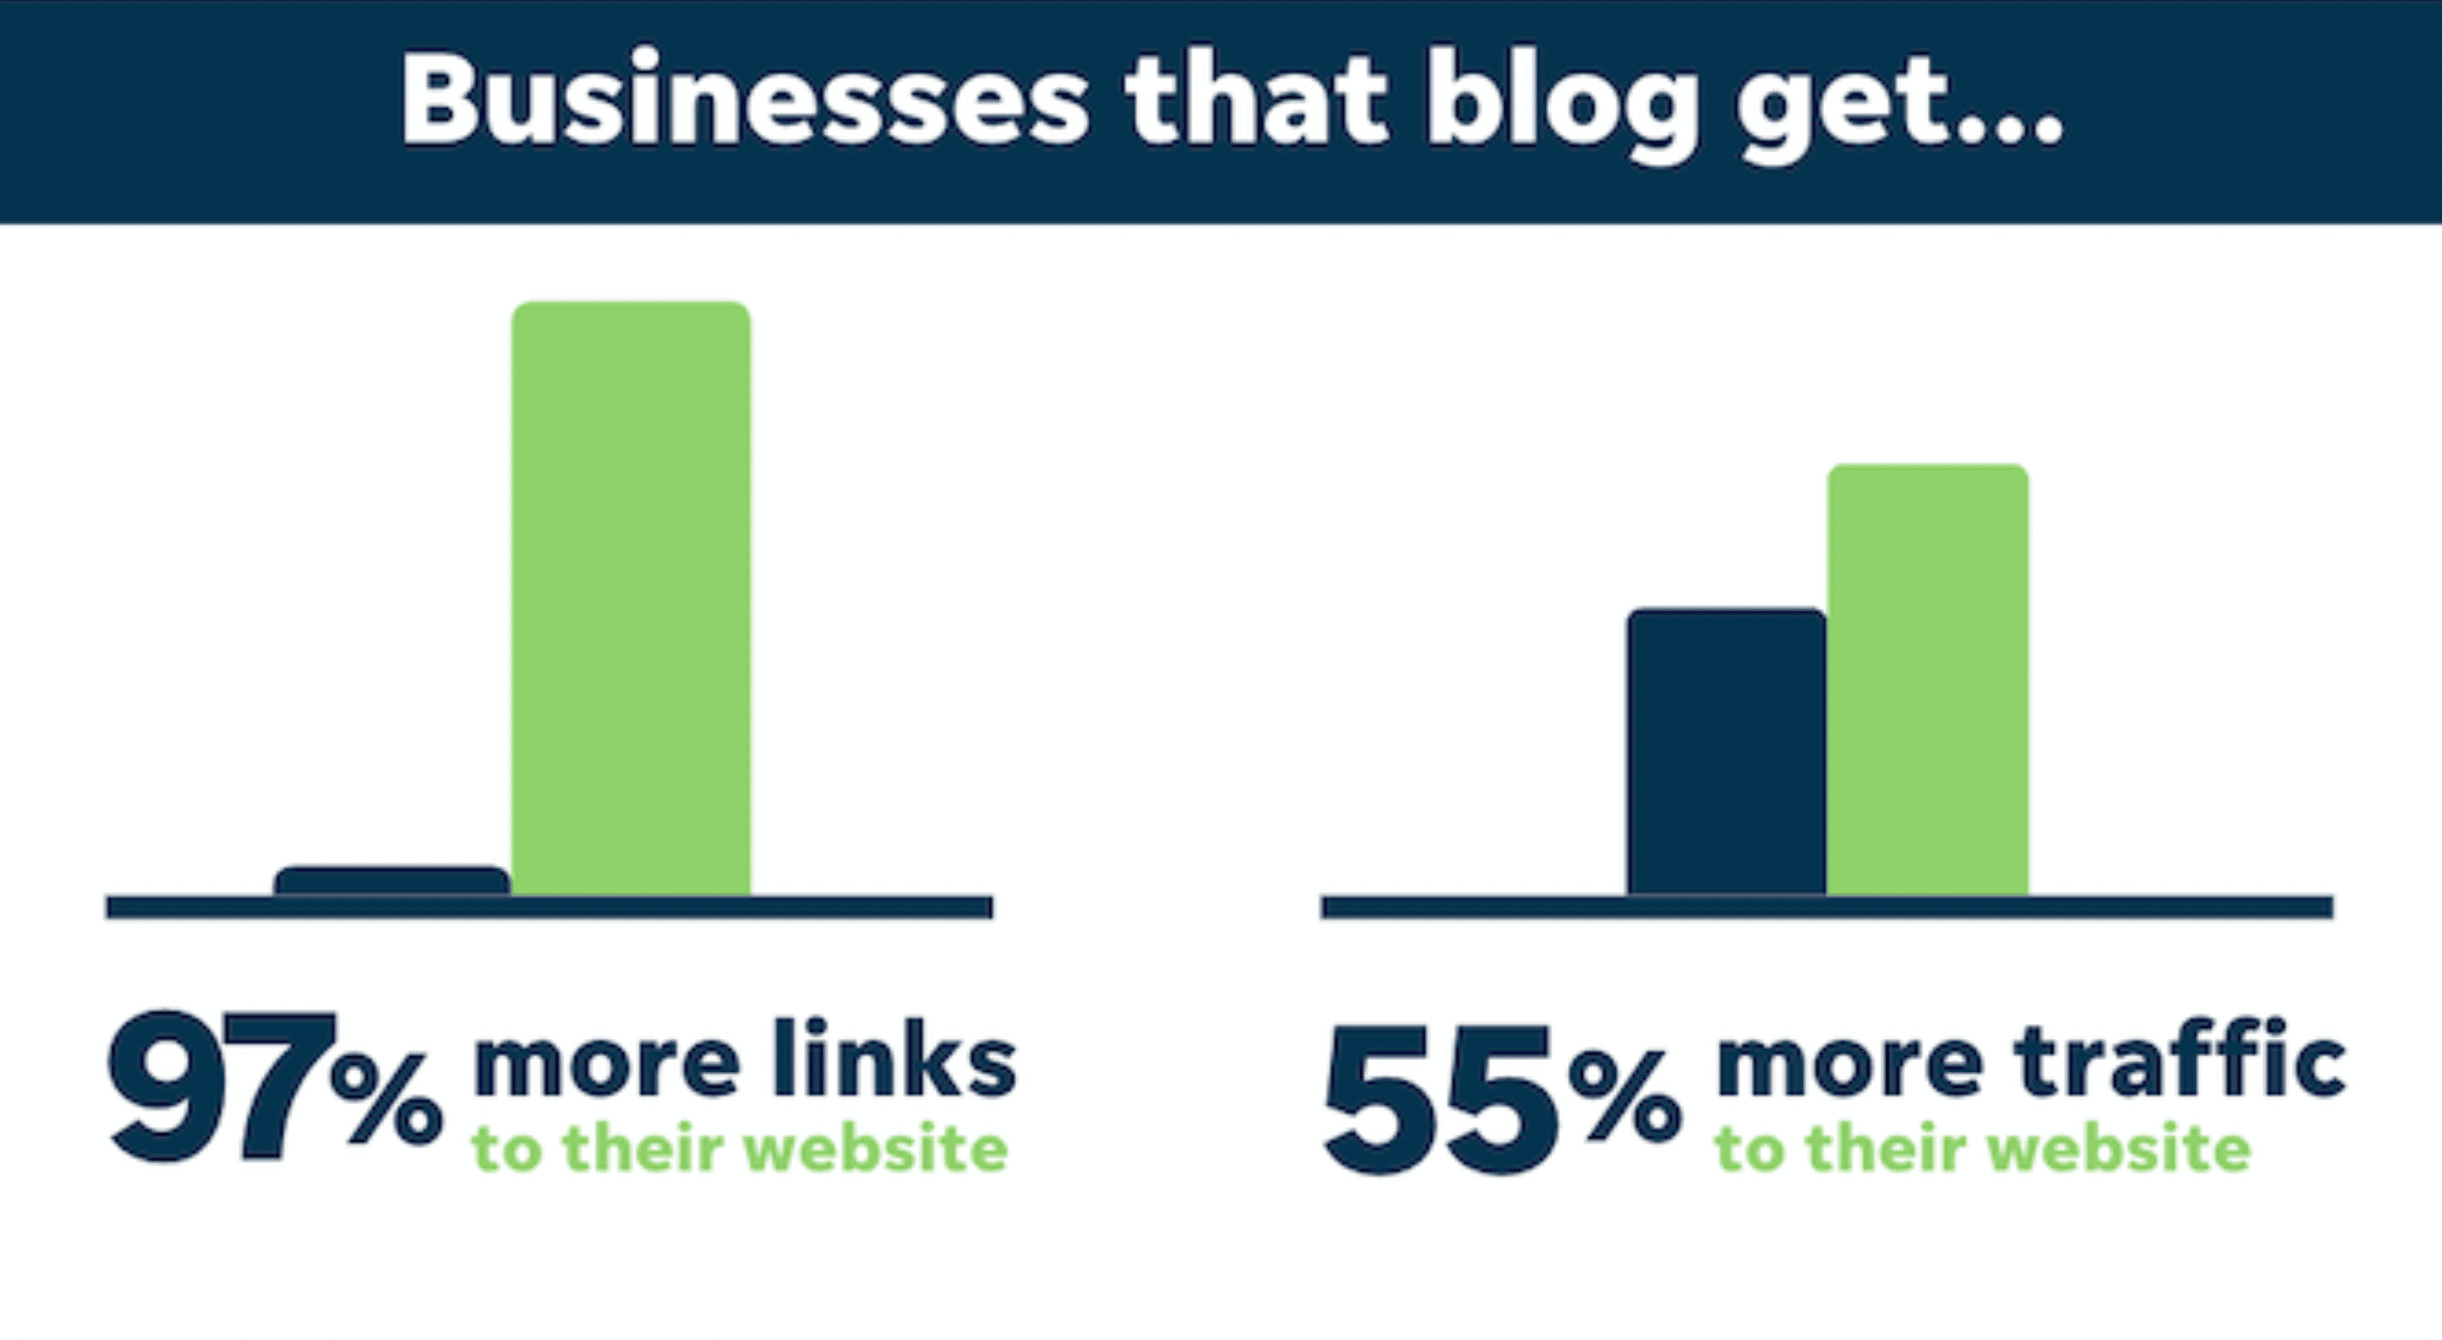 bar graphs show that businesses that blog get 97% more links and 55% more traffic to their websites